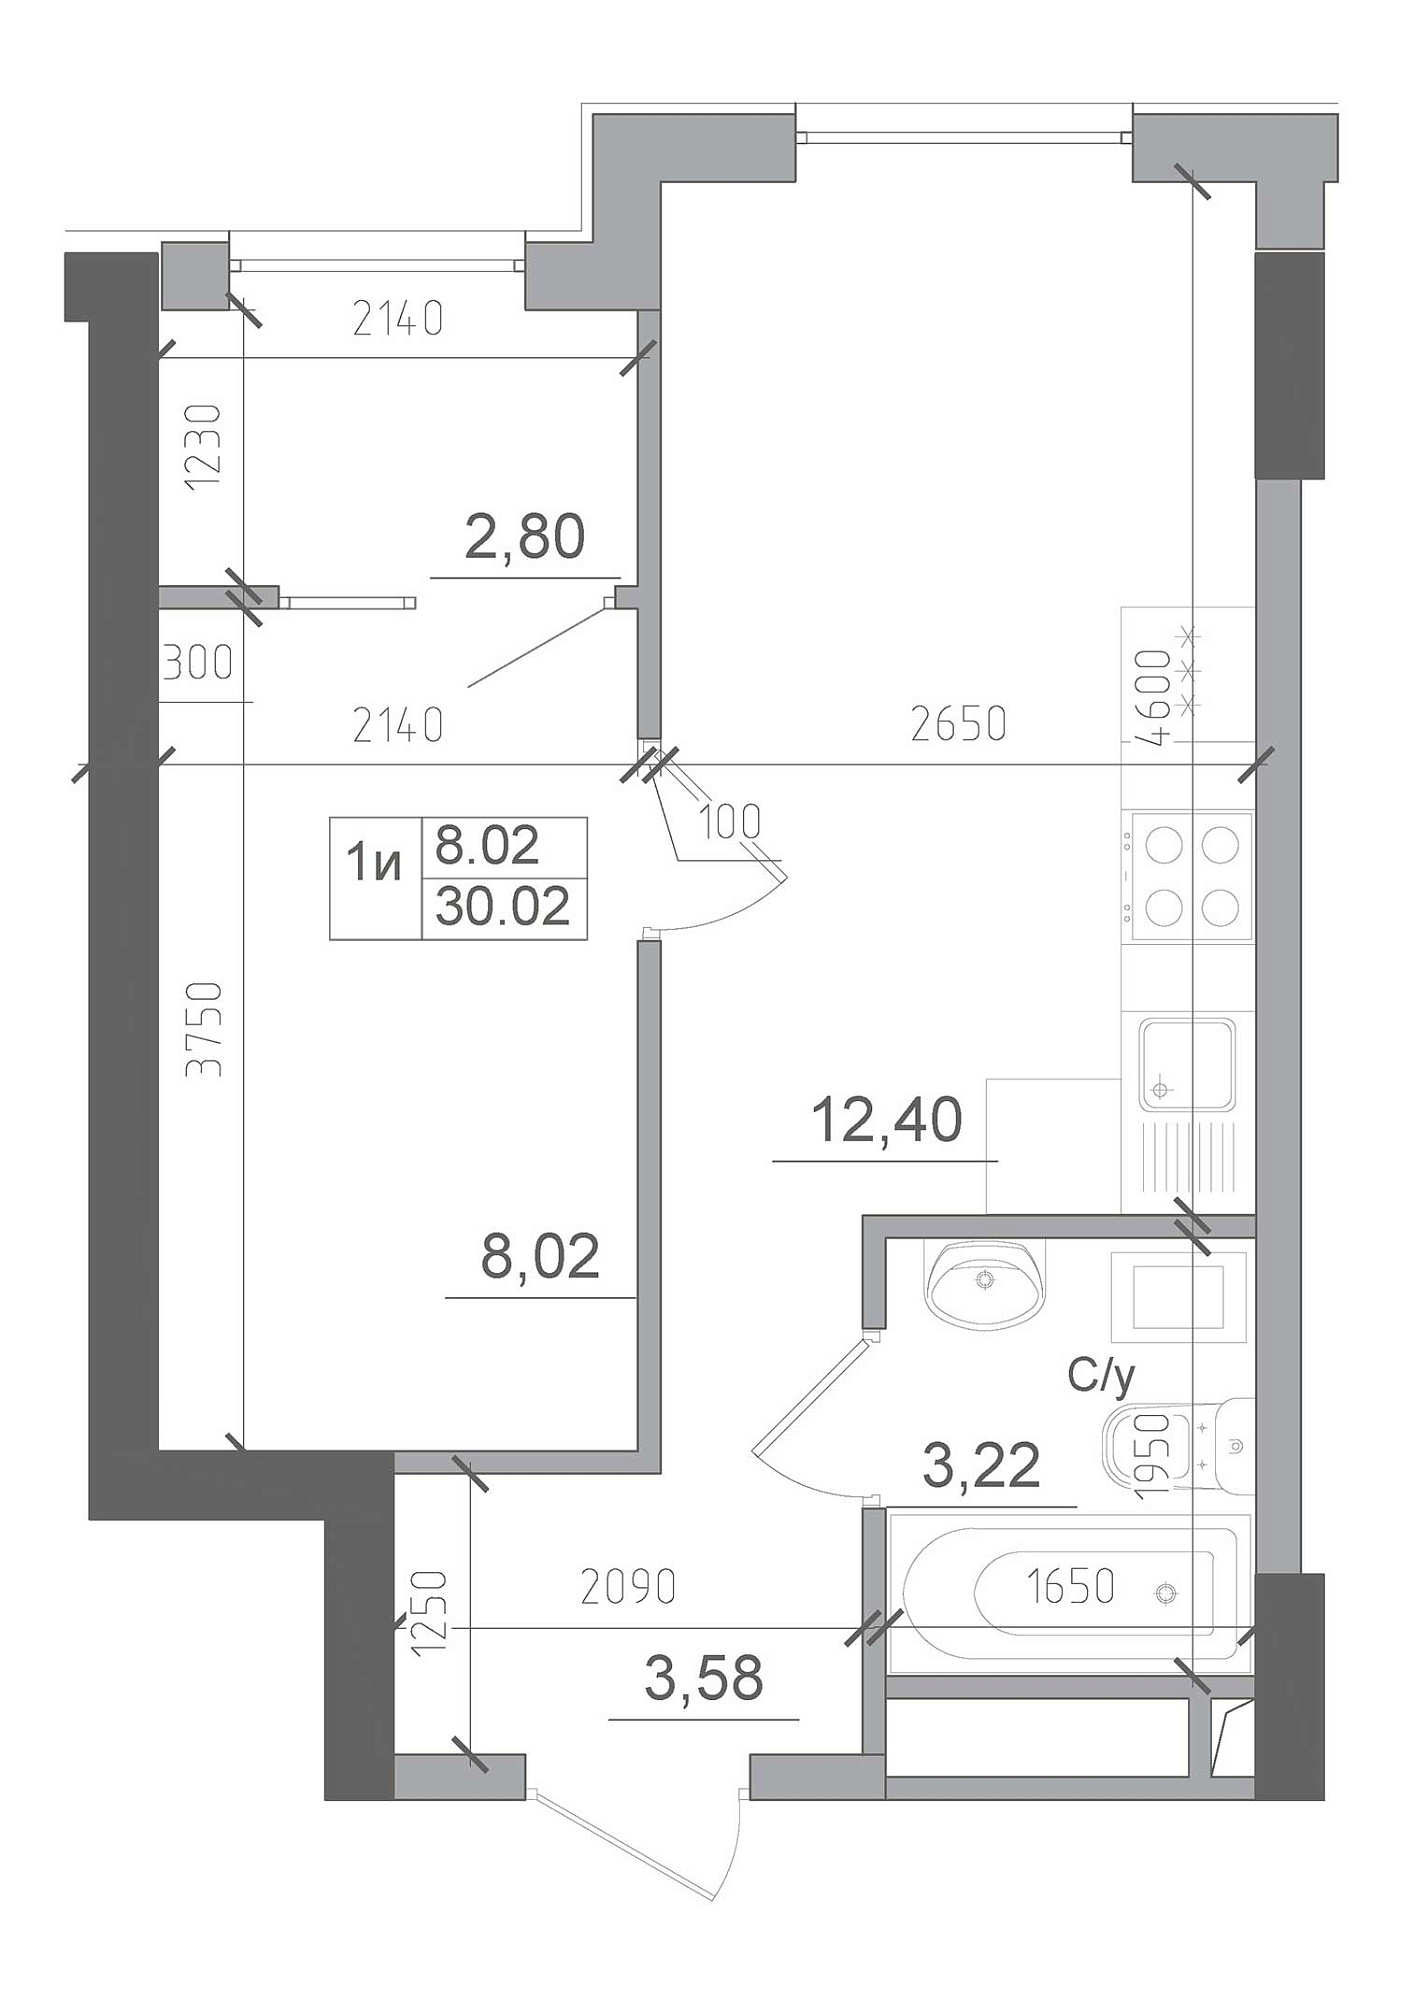 Planning 1-rm flats area 30.02m2, AB-22-08/00014.